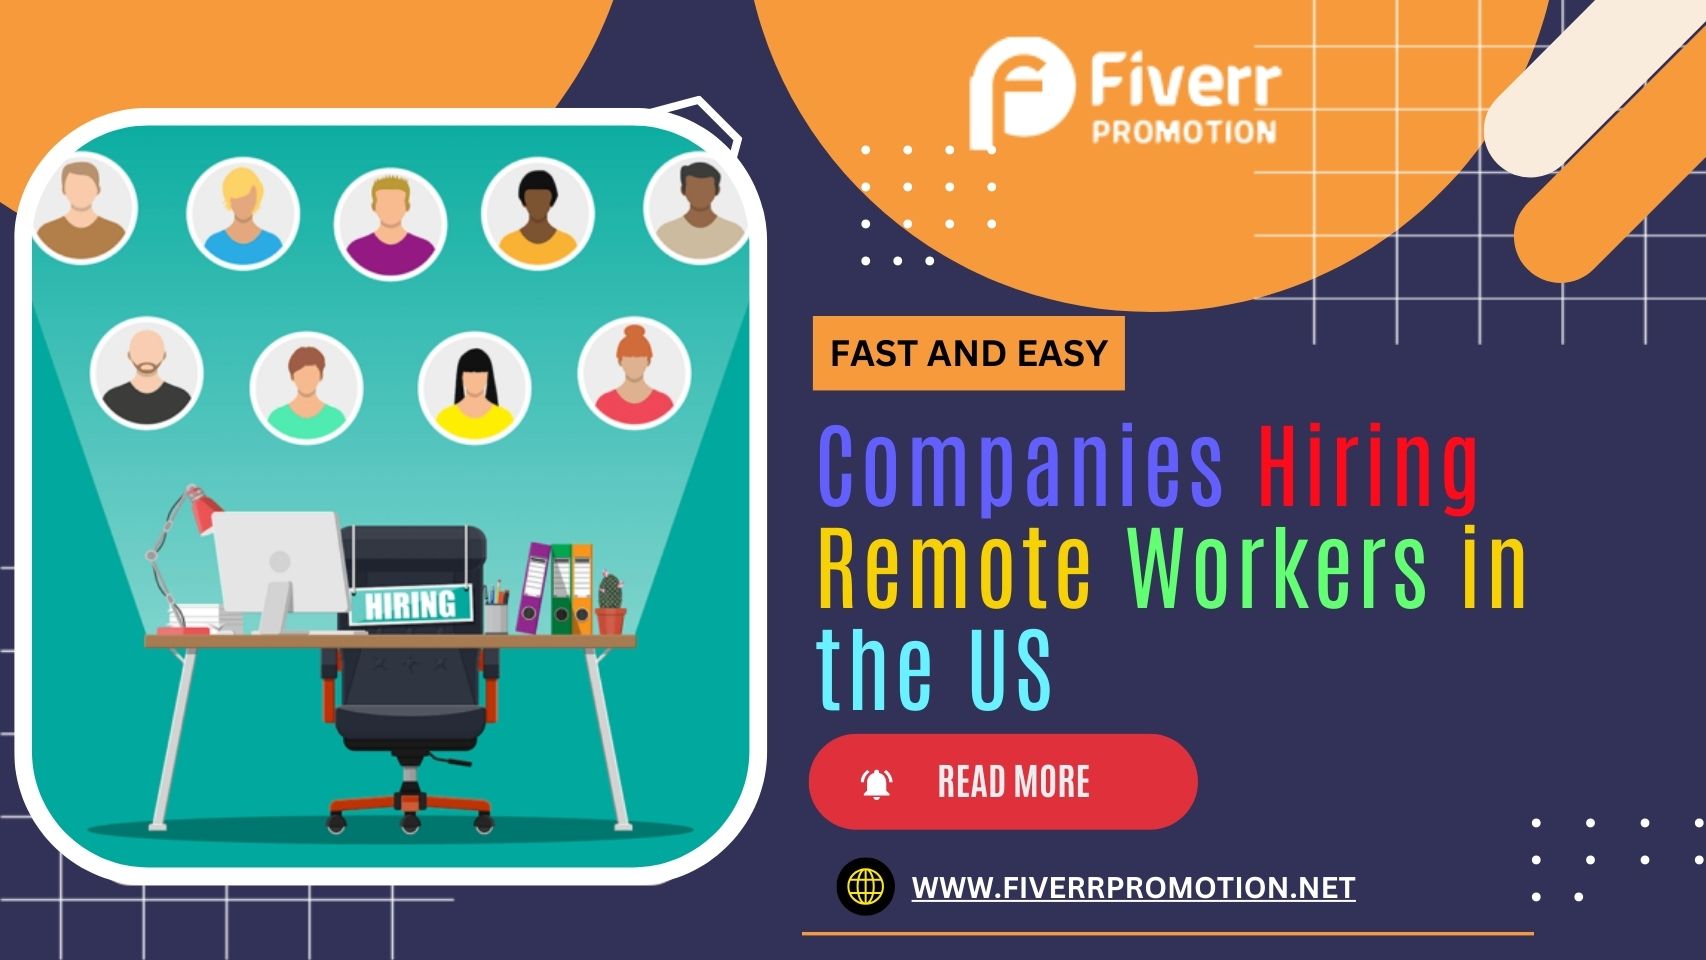 Fast and Easy: Companies Hiring Remote Workers in the US